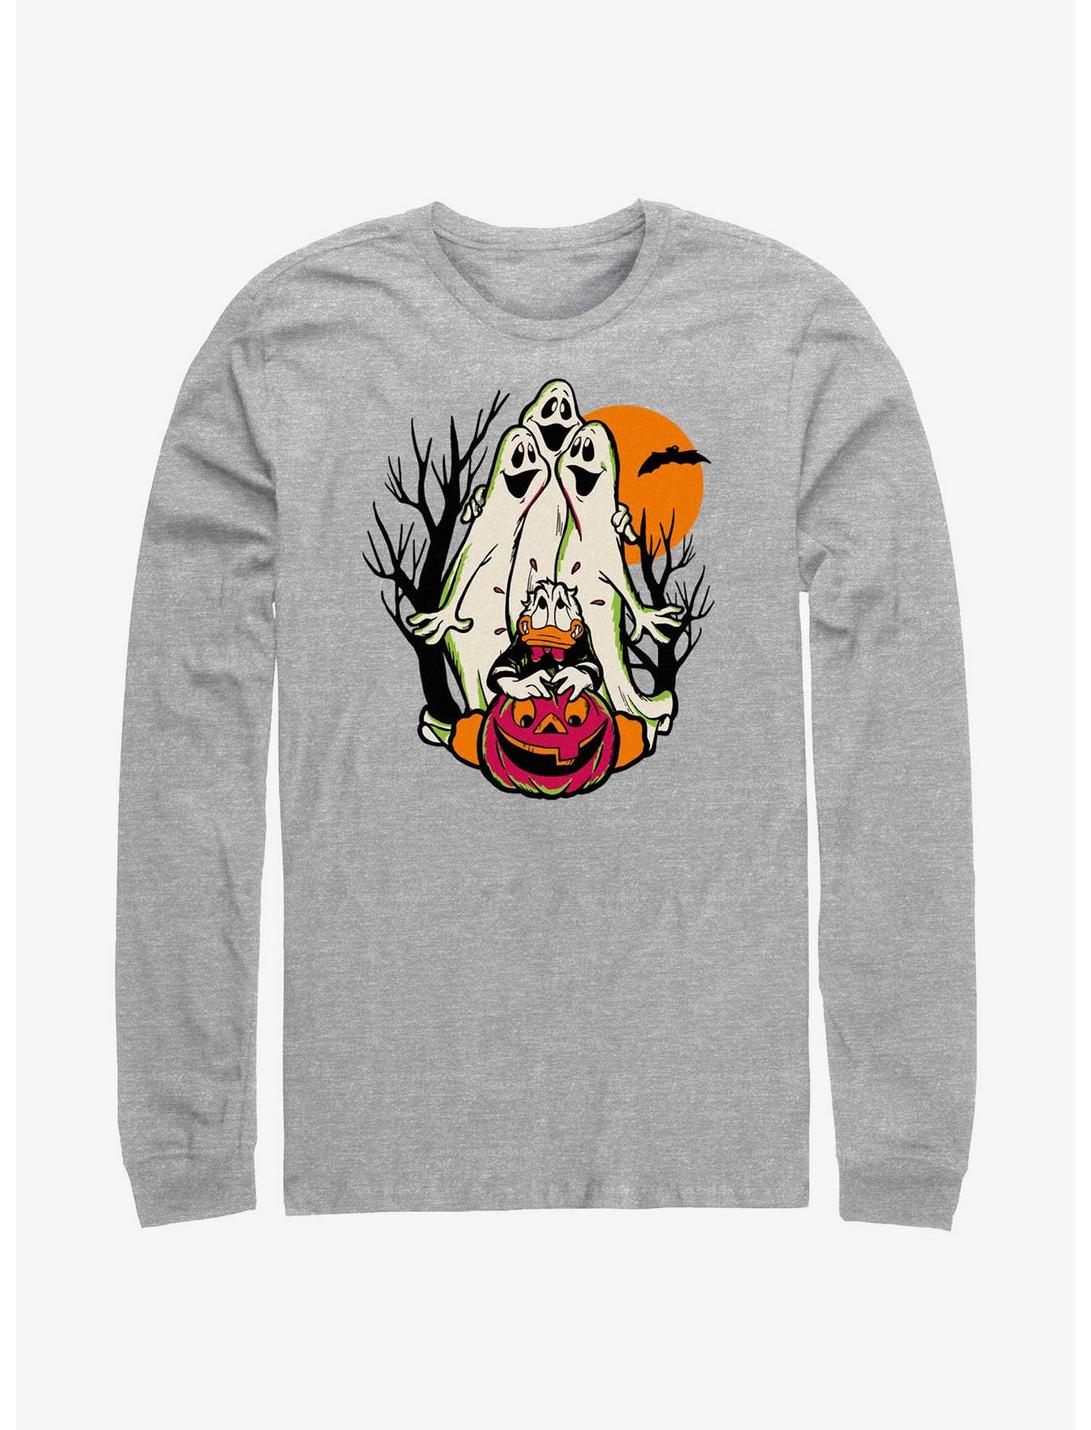 Disney100 Halloween Spooky Ghosts Scared Donald Long-Sleeve T-Shirt, ATH HTR, hi-res